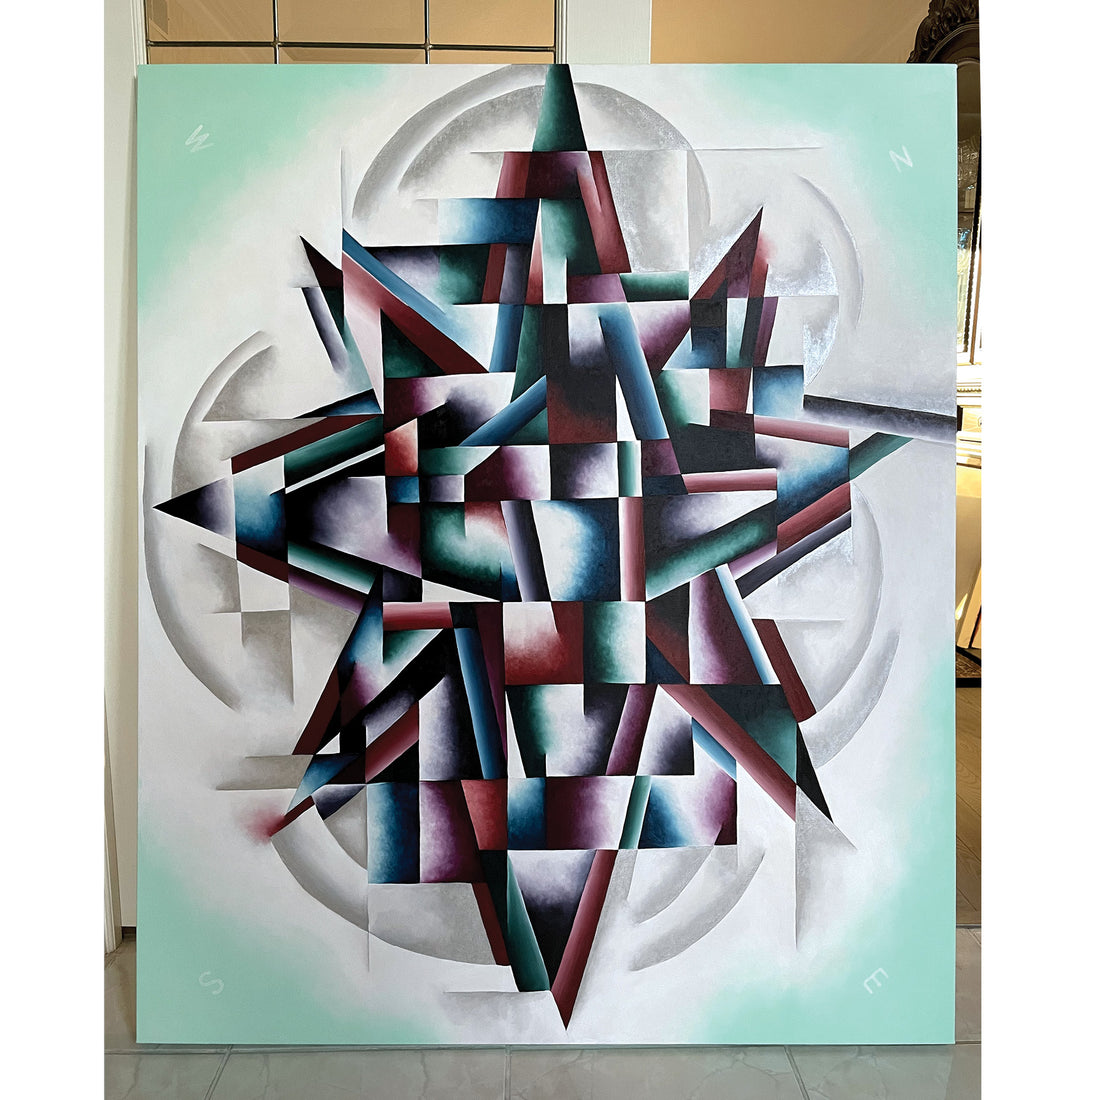 Mais Al-Sheikhly "Shattered Moral Compass" abstract cubism painting Canadian artist Kefi Art Gallery